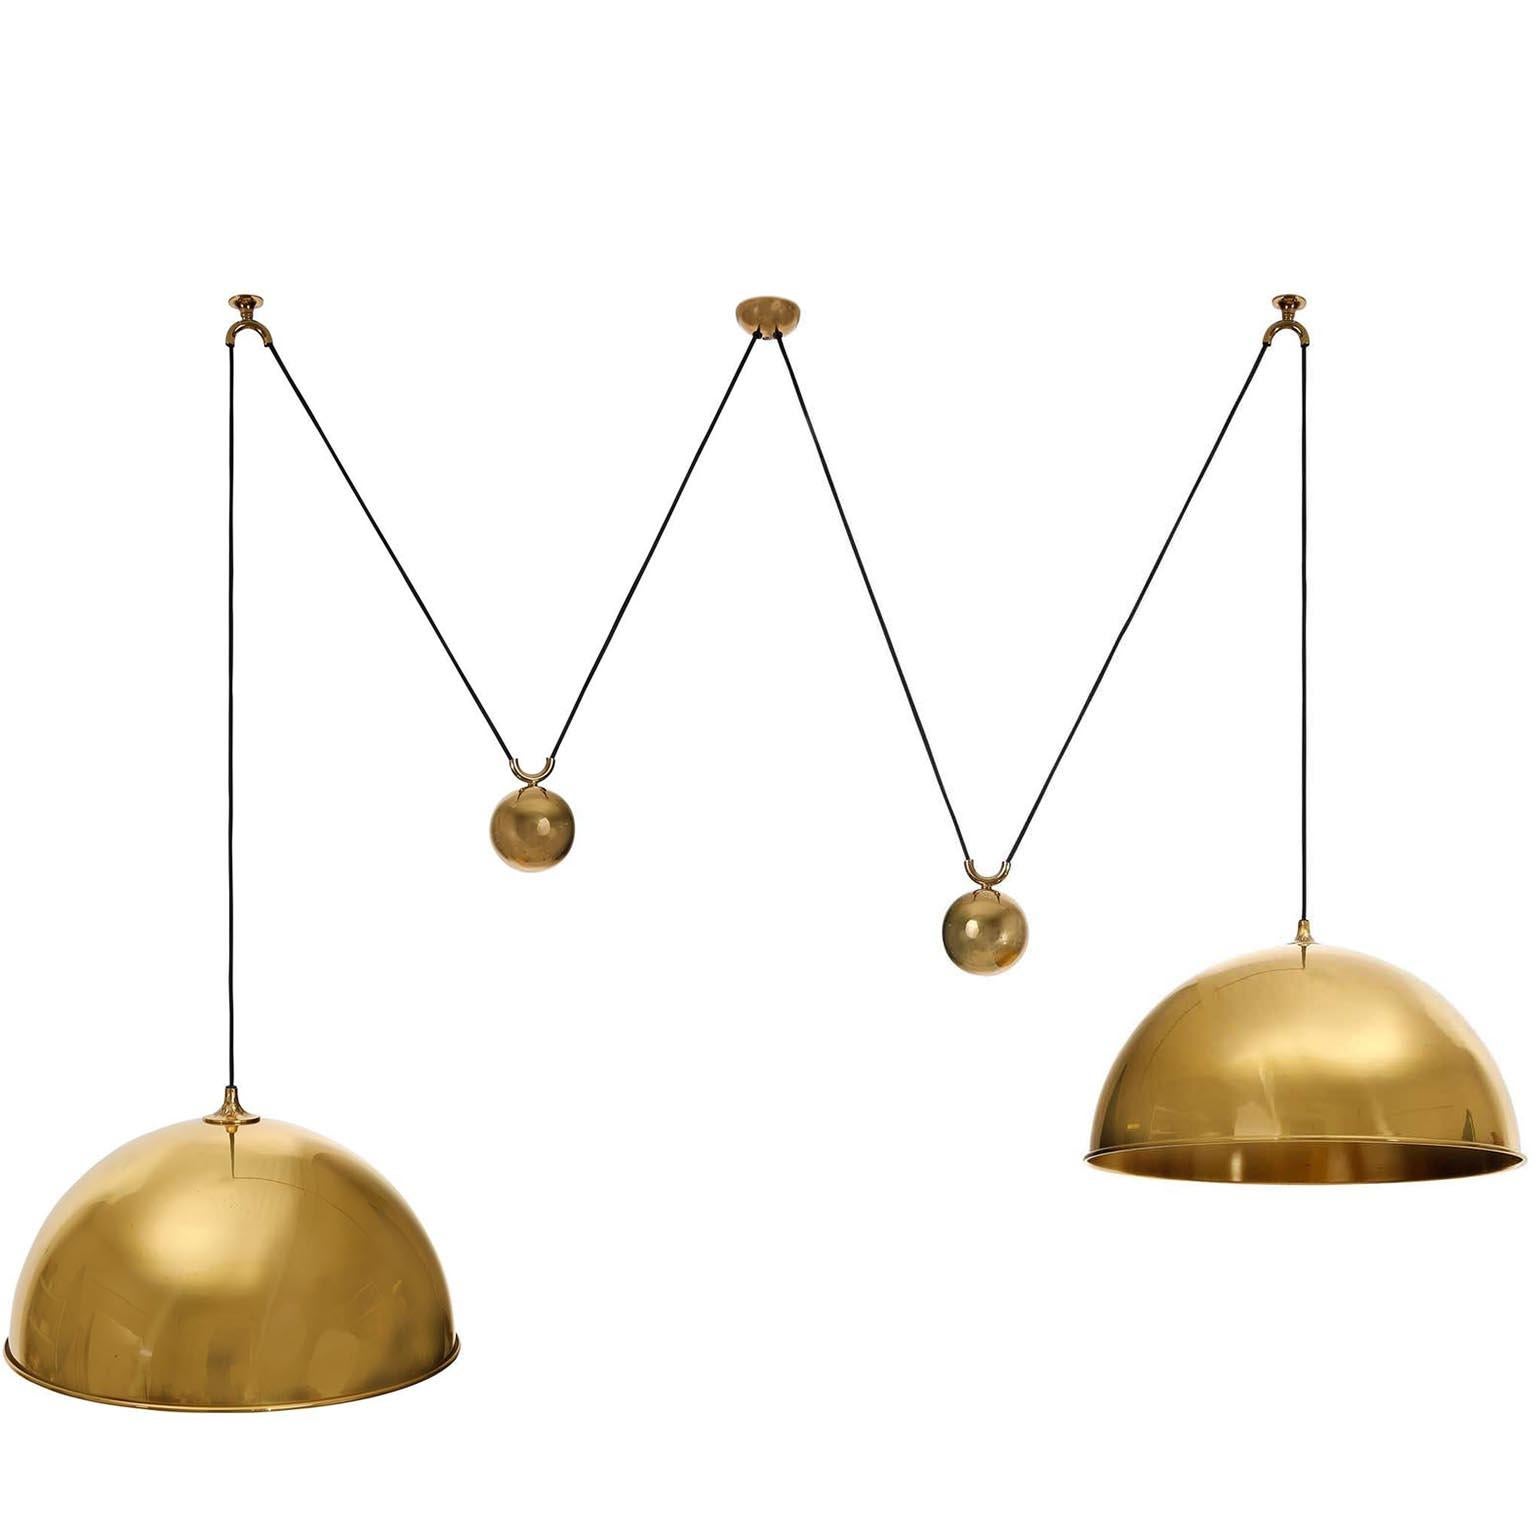 A height adjustable pendant lamp by Florian Schulz, Germany, manufactured in midcentury, circa 1970 (late 1960s-early 1970s).
All parts are made of solid polished brass which have an aged surface in a rich and warm tone and lovely patina.
The